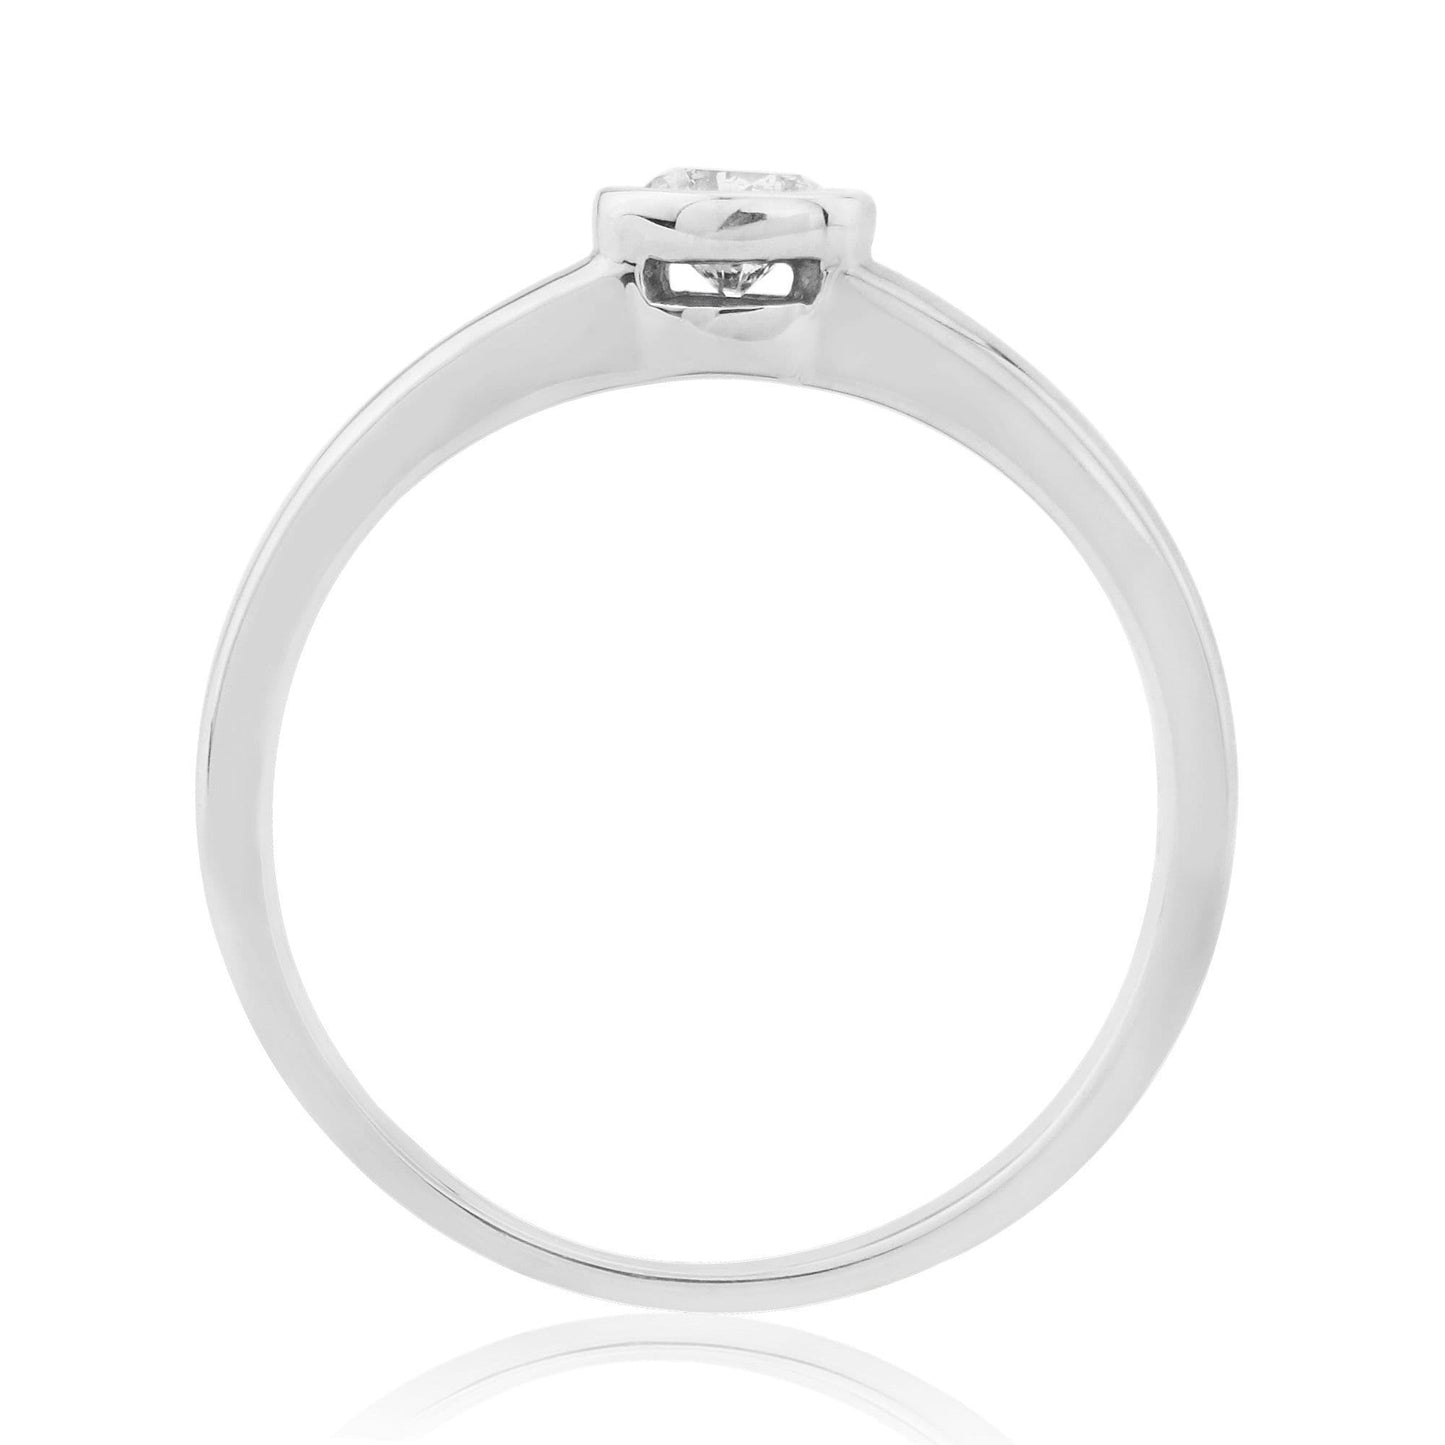 Engagement ring quarter carat diamond rubbed over solitaire single stone white gold 25 points